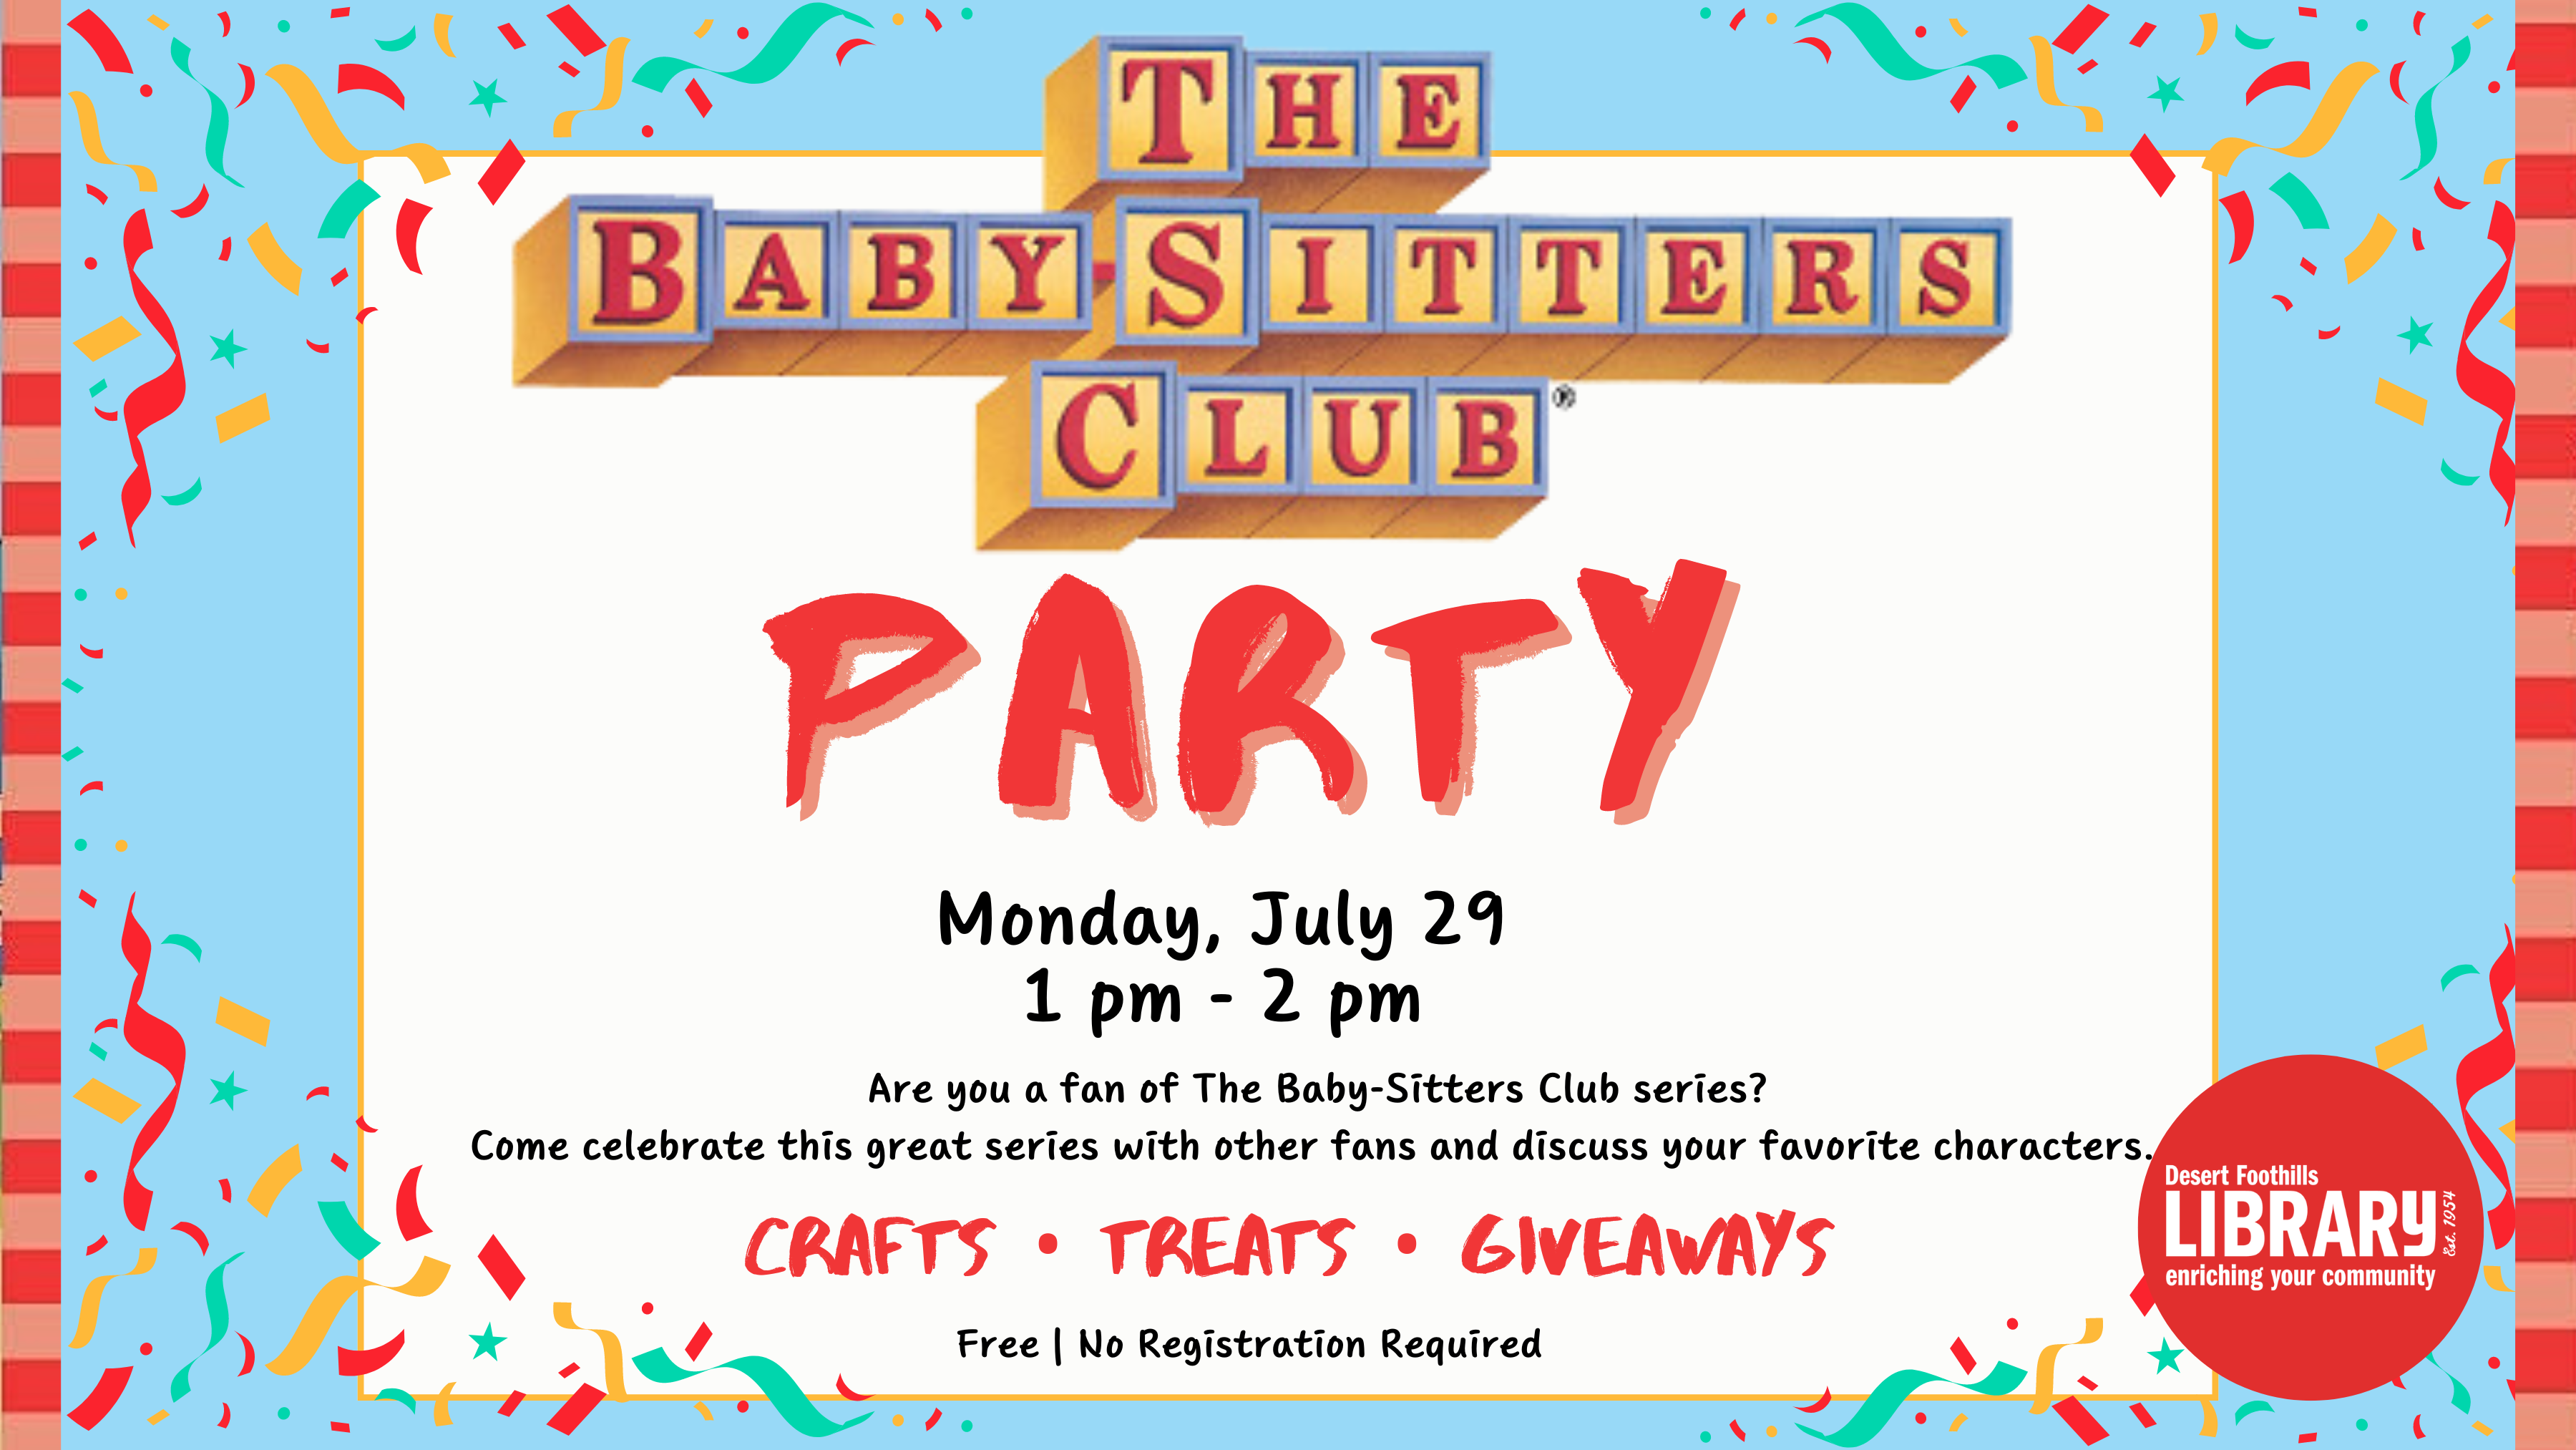 babysitters club part at the desert foothills library